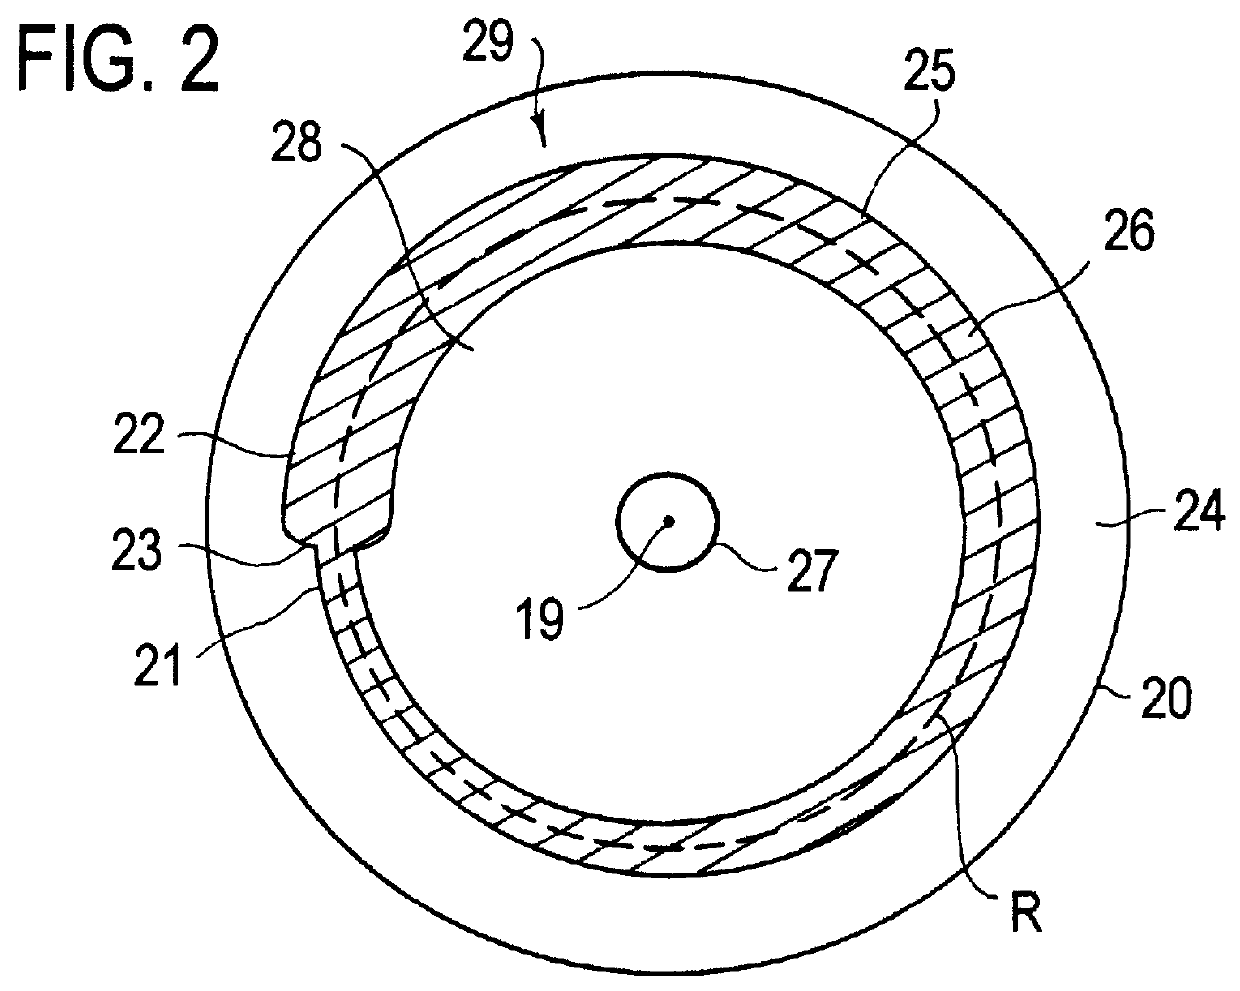 Magnetic position sensor having a variable width magnet mounted into a rotating disk and a hall effect sensor